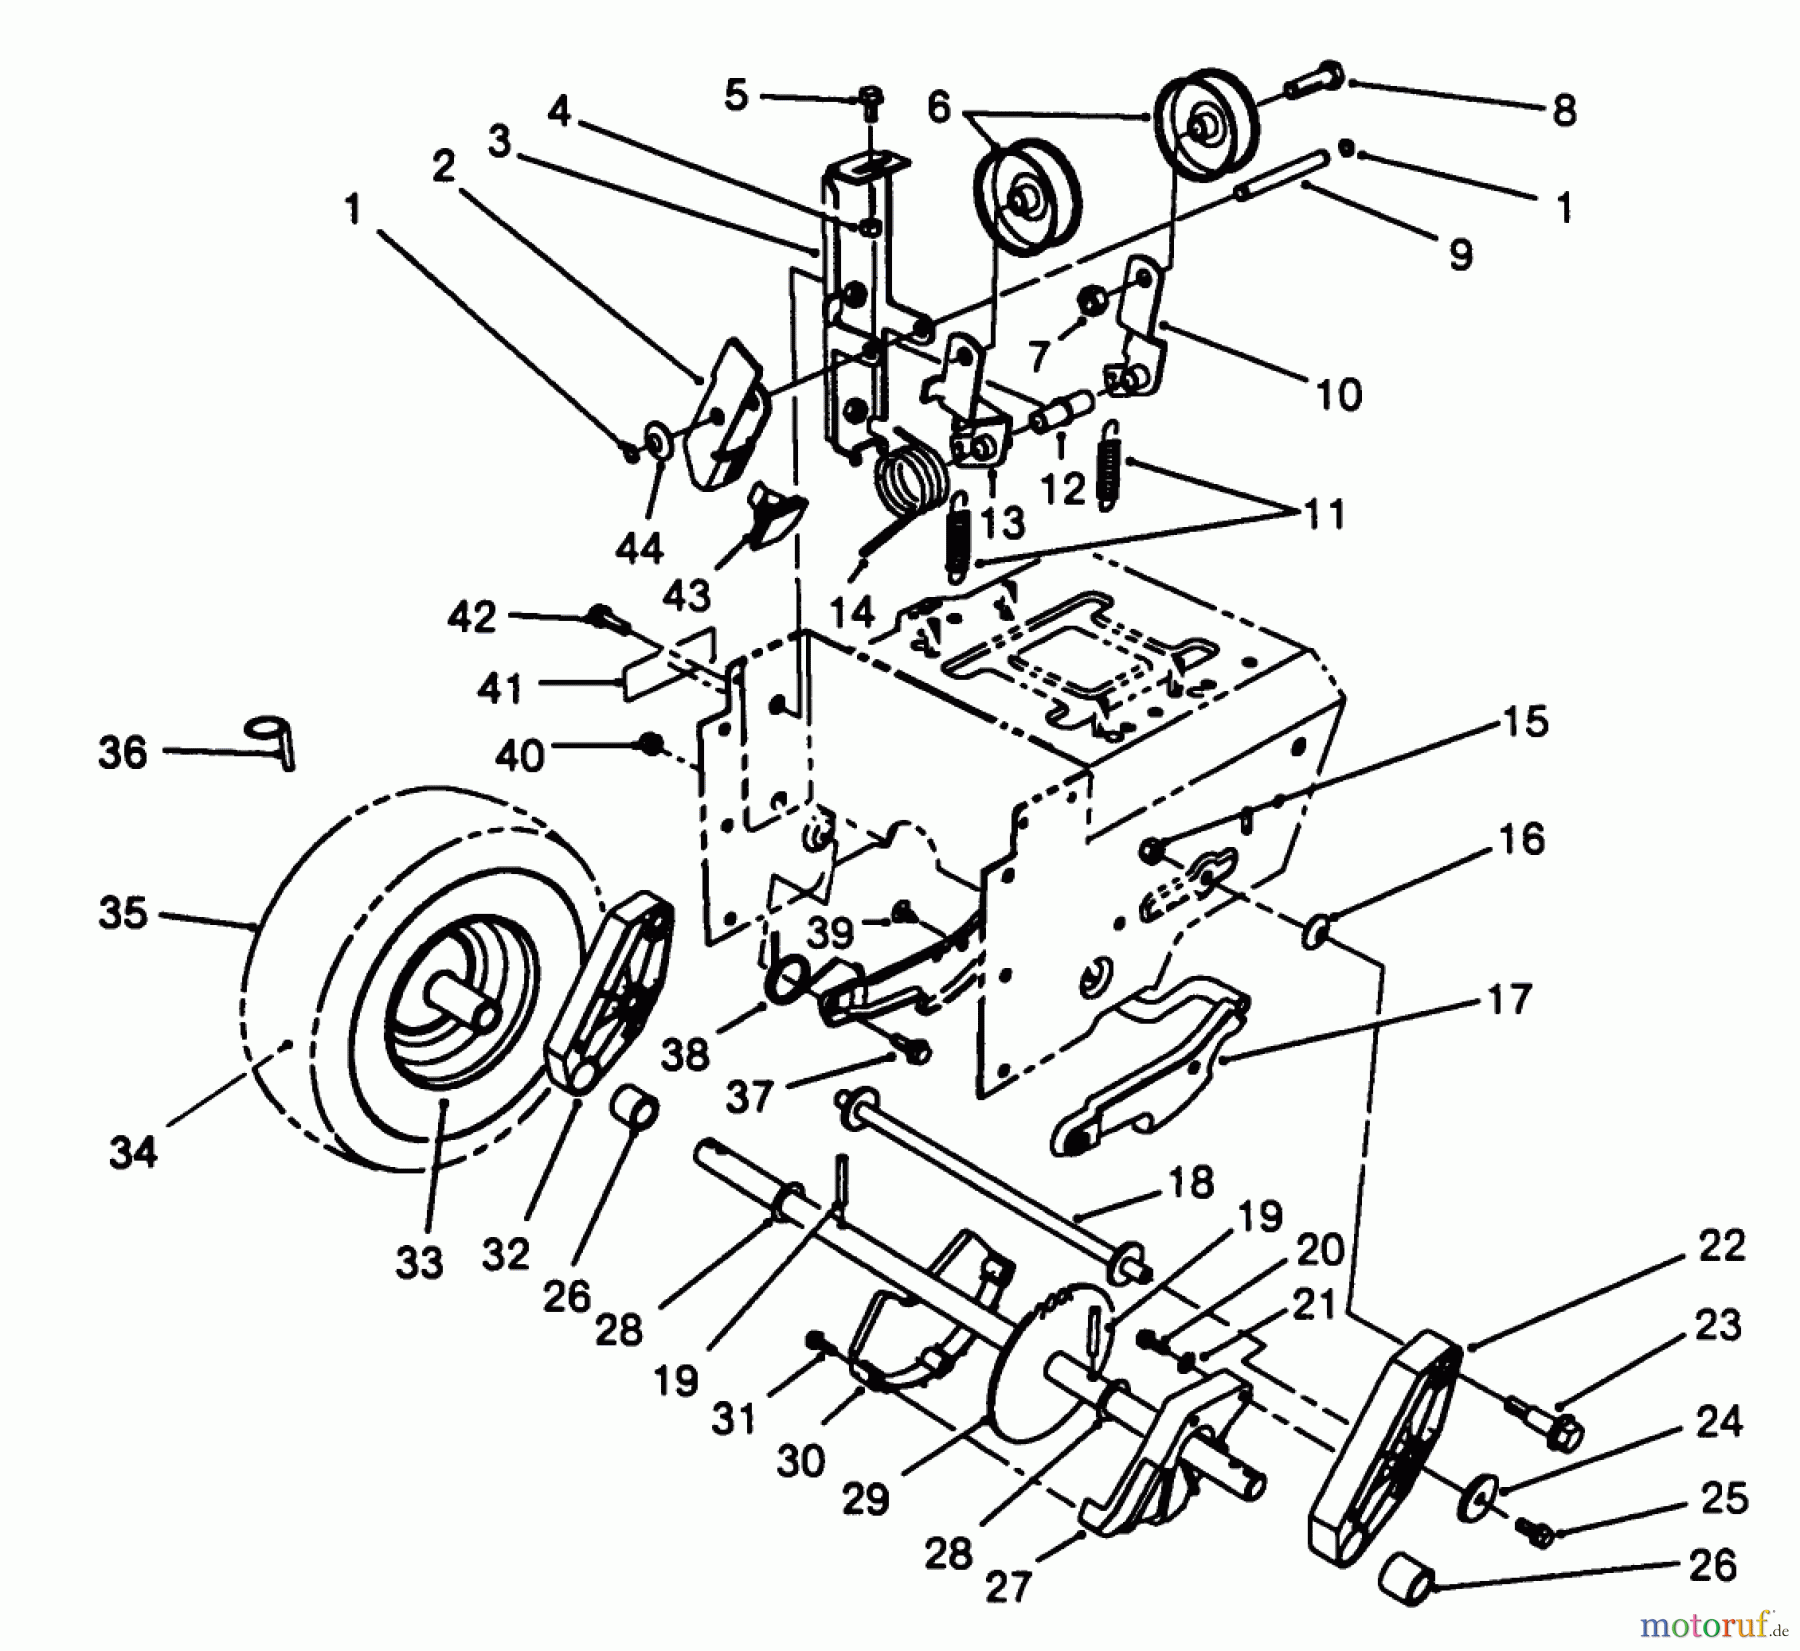  Toro Neu Snow Blowers/Snow Throwers Seite 1 38520 (724) - Toro 724 Power Shift Snowthrower, 1988 (8000001-8999999) TRACTION DRIVE ASSEMBLY